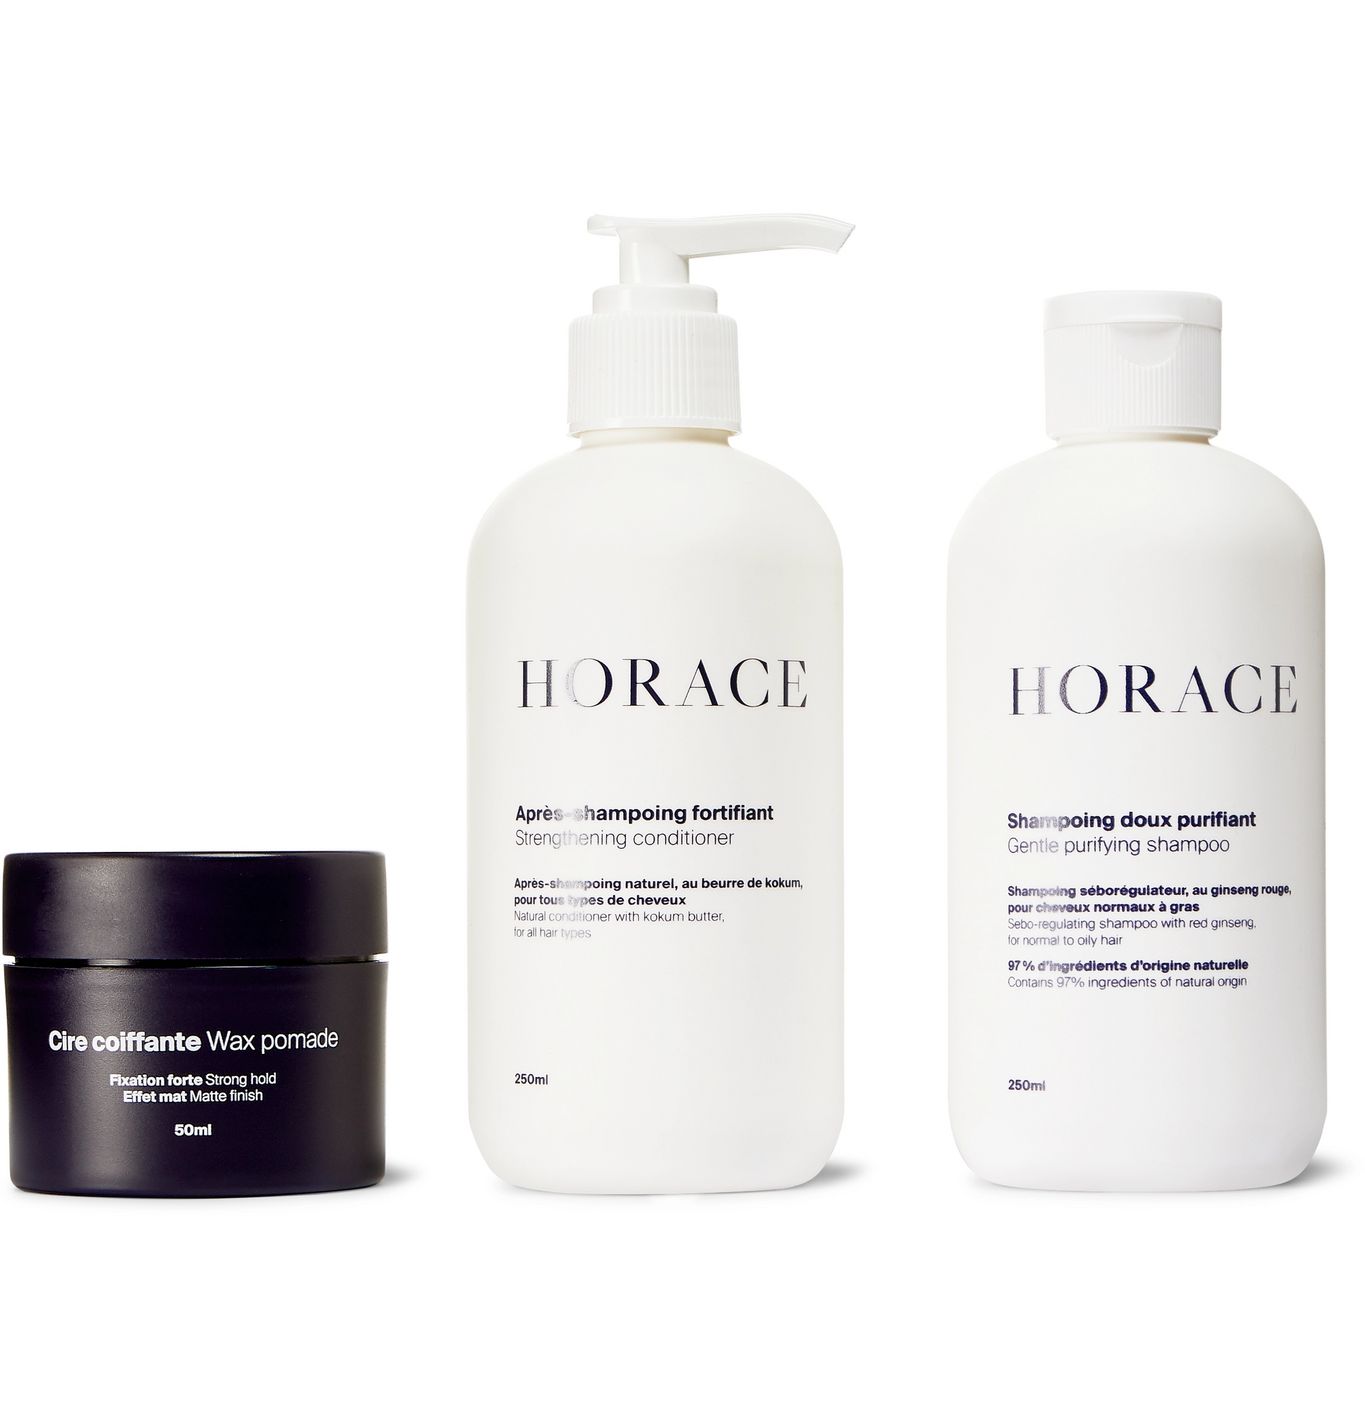 Horace Hair Kit (Shampoo, Conditioner, and Wax Pomade)